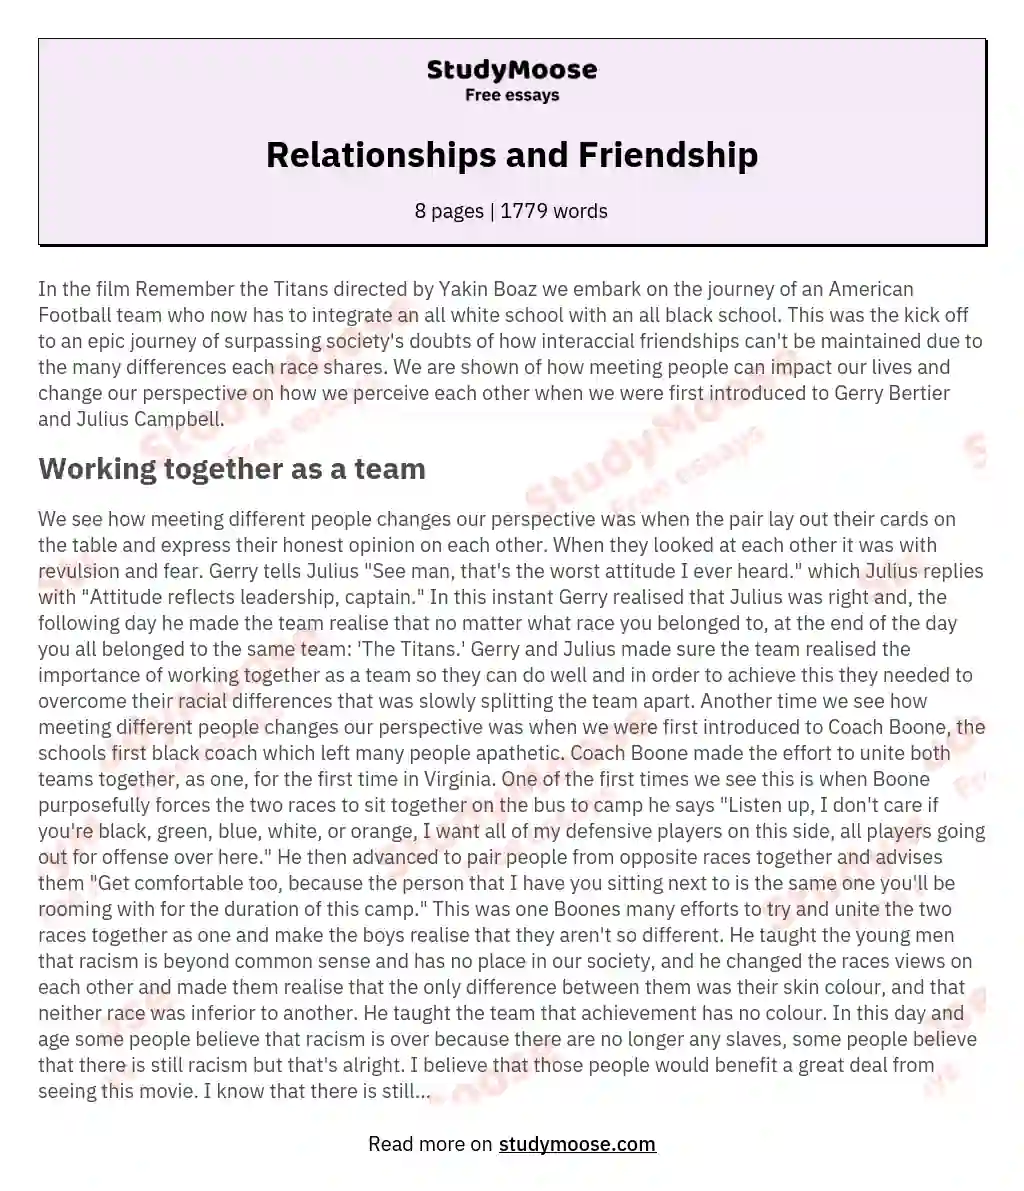 Relationships and Friendship